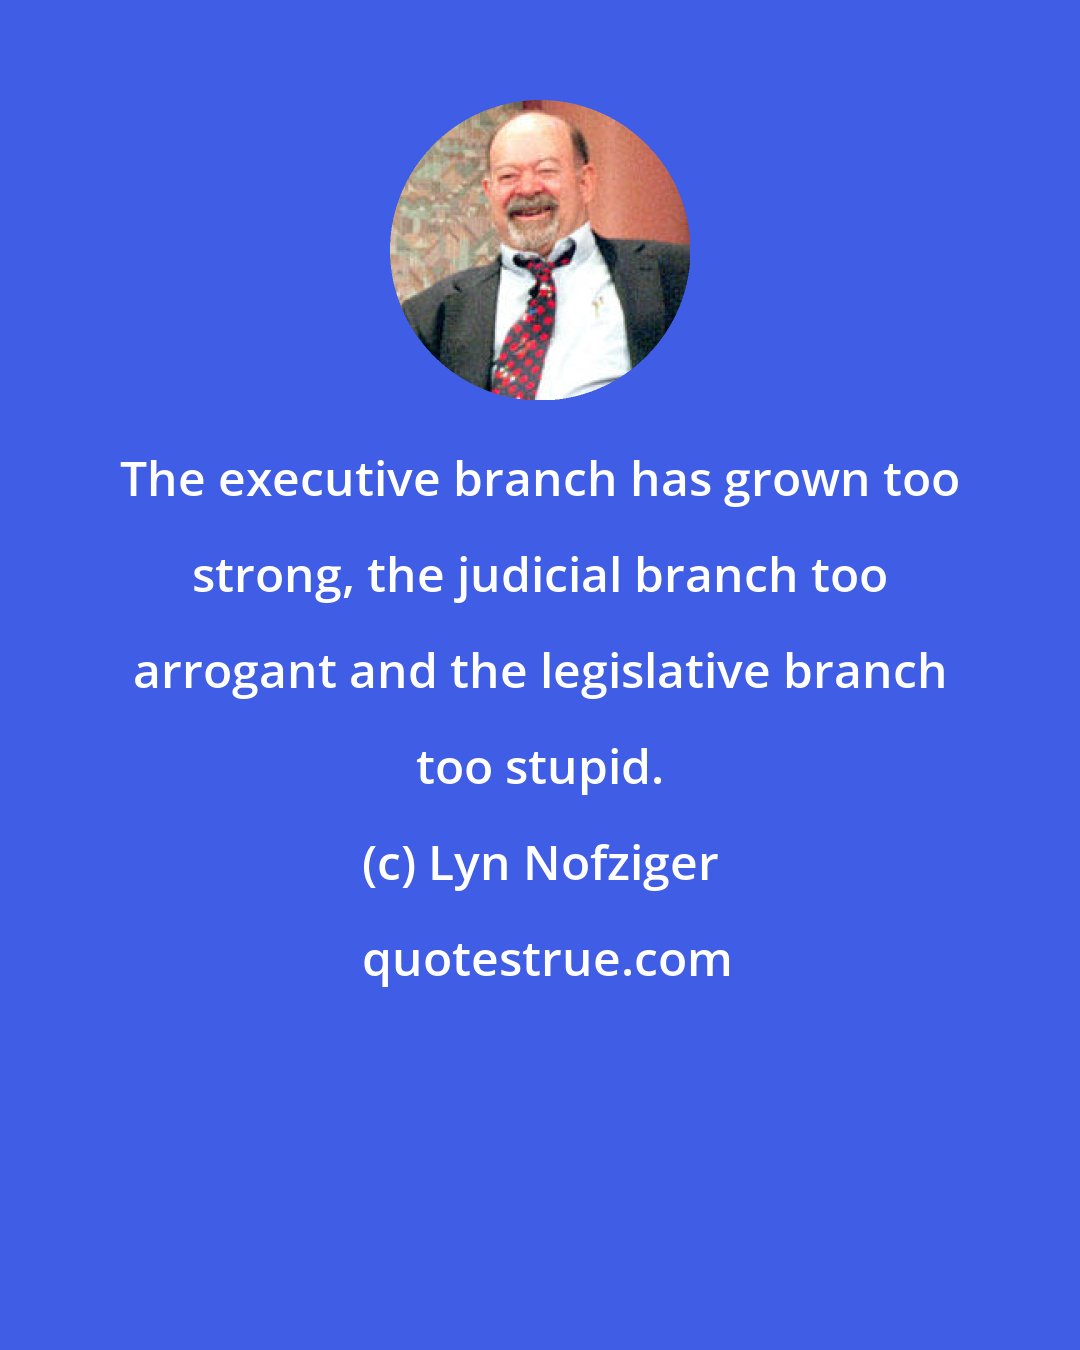 Lyn Nofziger: The executive branch has grown too strong, the judicial branch too arrogant and the legislative branch too stupid.